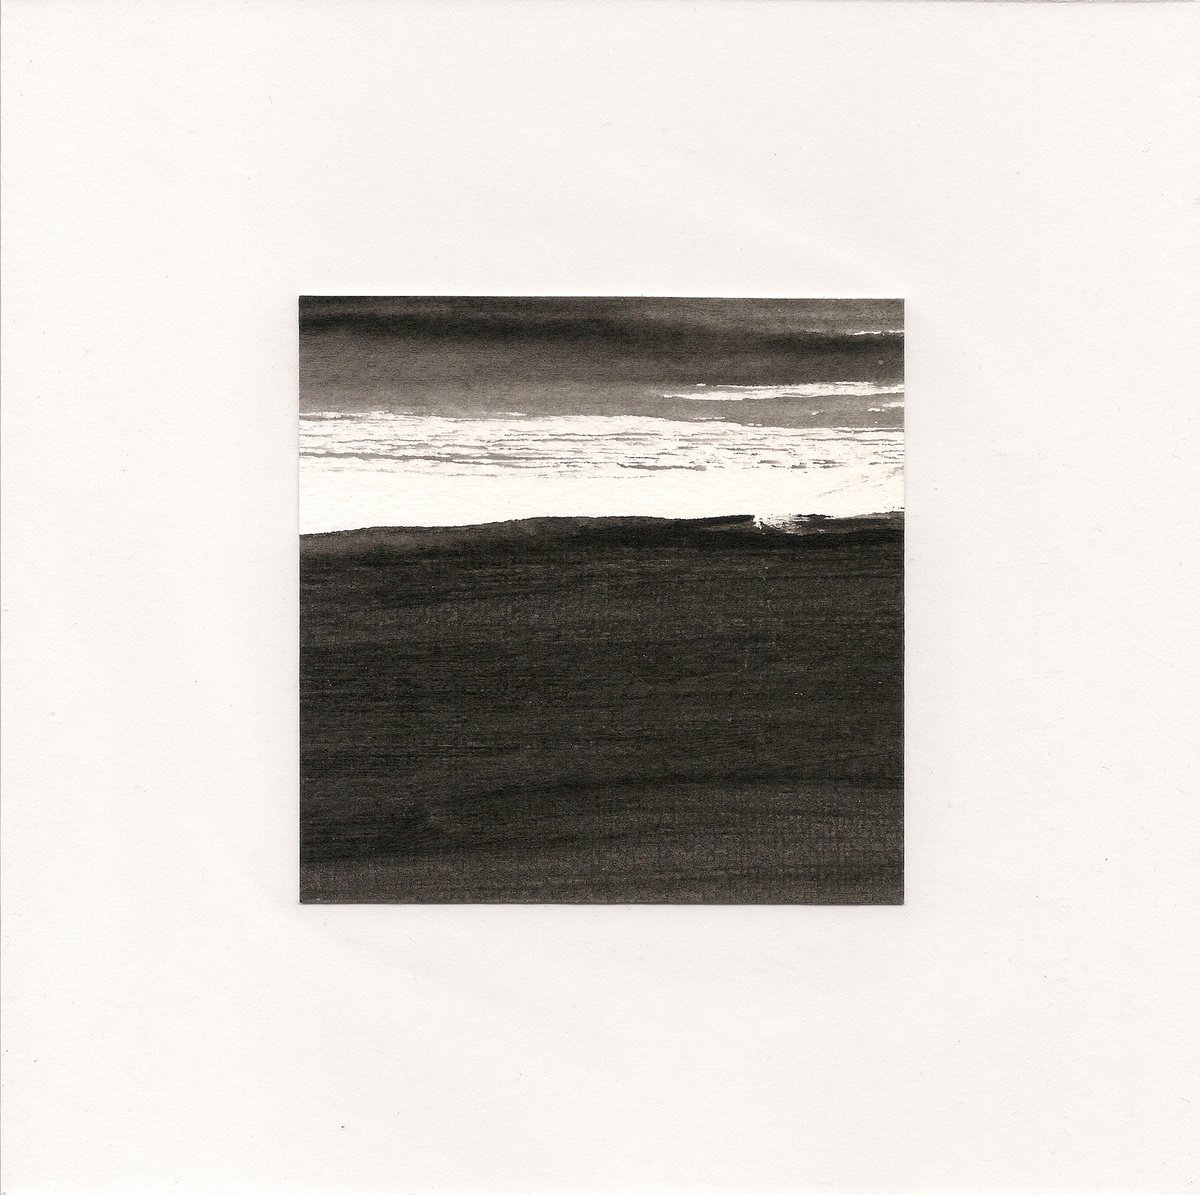 Horizon - Atmospheric landscape in black and white - Miniature - Ready to frame by Fabienne Monestier